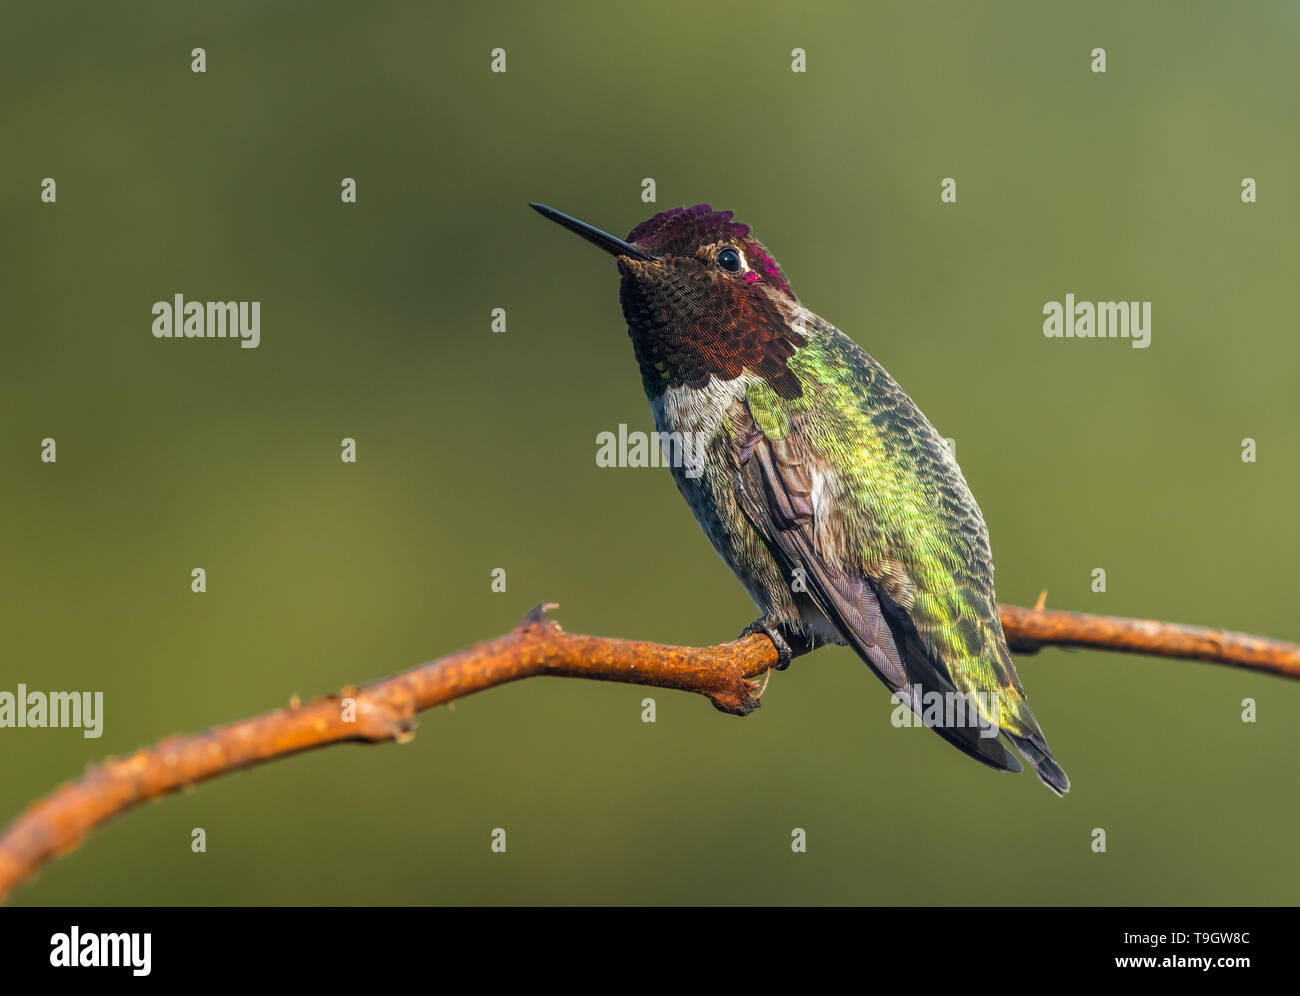 A male Annas Hummingbird (Calypte anna) watching while perched on a branch. Stock Photo